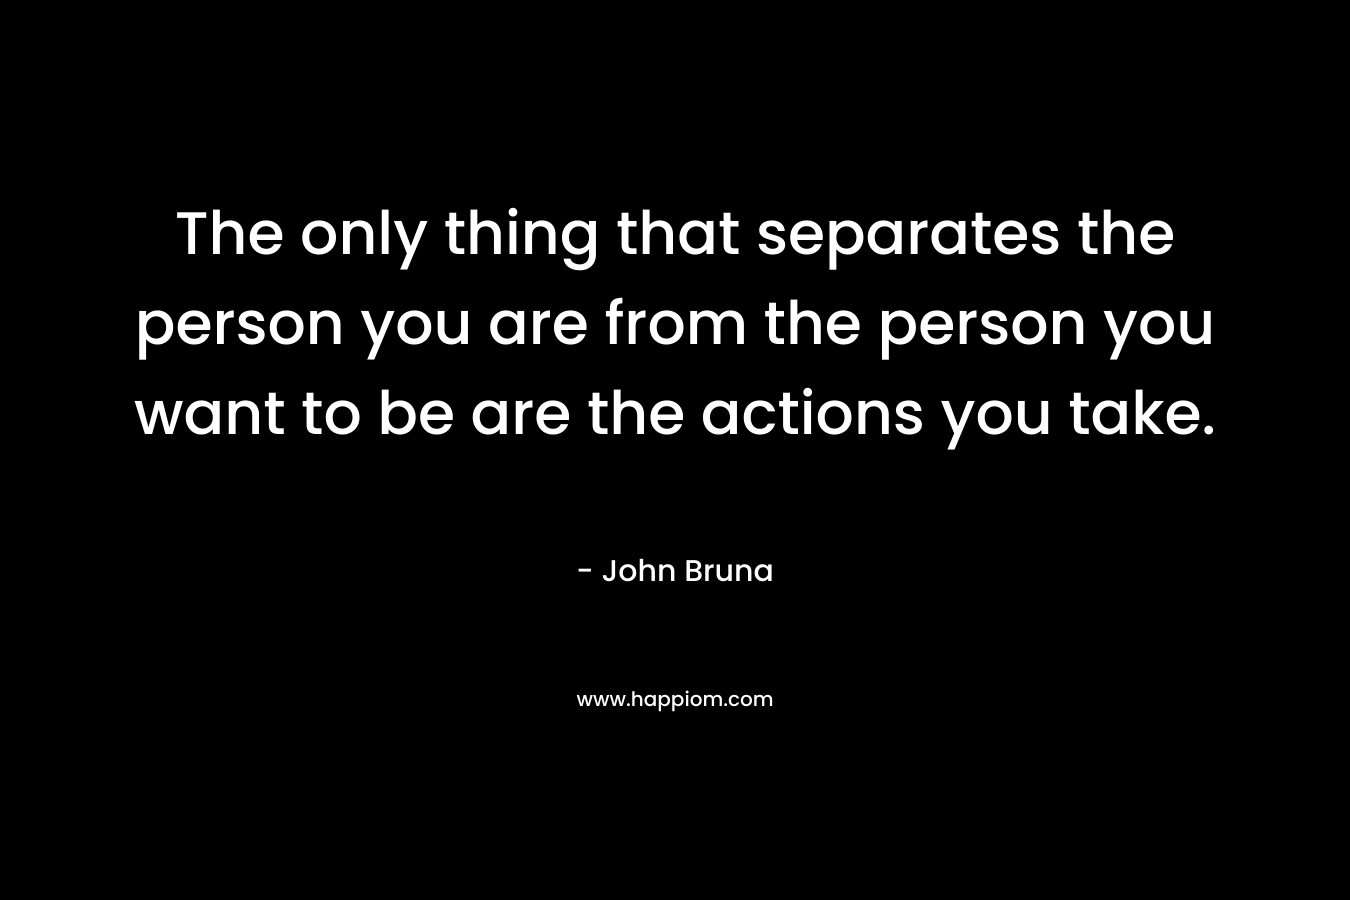 The only thing that separates the person you are from the person you want to be are the actions you take. – John Bruna